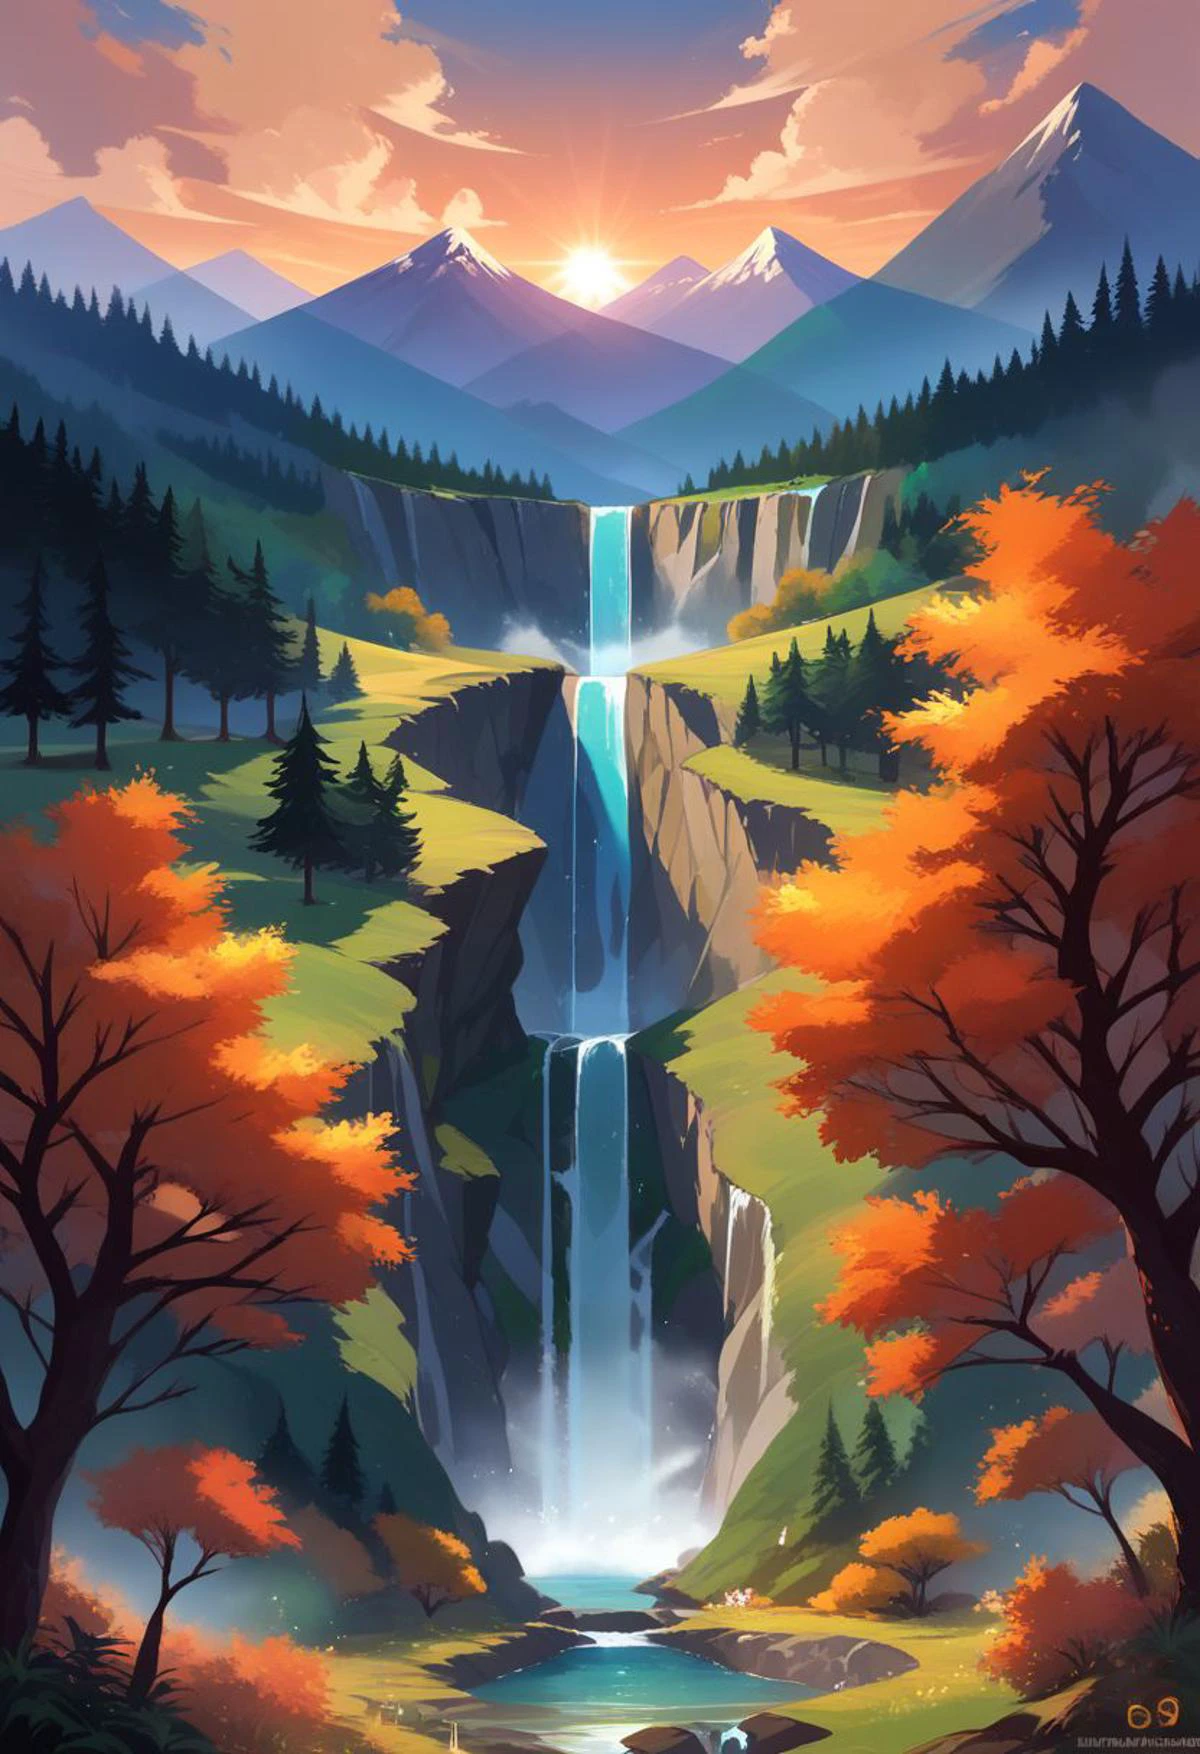 score_9, score_8_up, score_7_up, score_6_up, score_5_up, score_4_up, waterfall, mountains, forest, wind, fire, masterpiece, source_painted_concept_art
BREAK
View from above